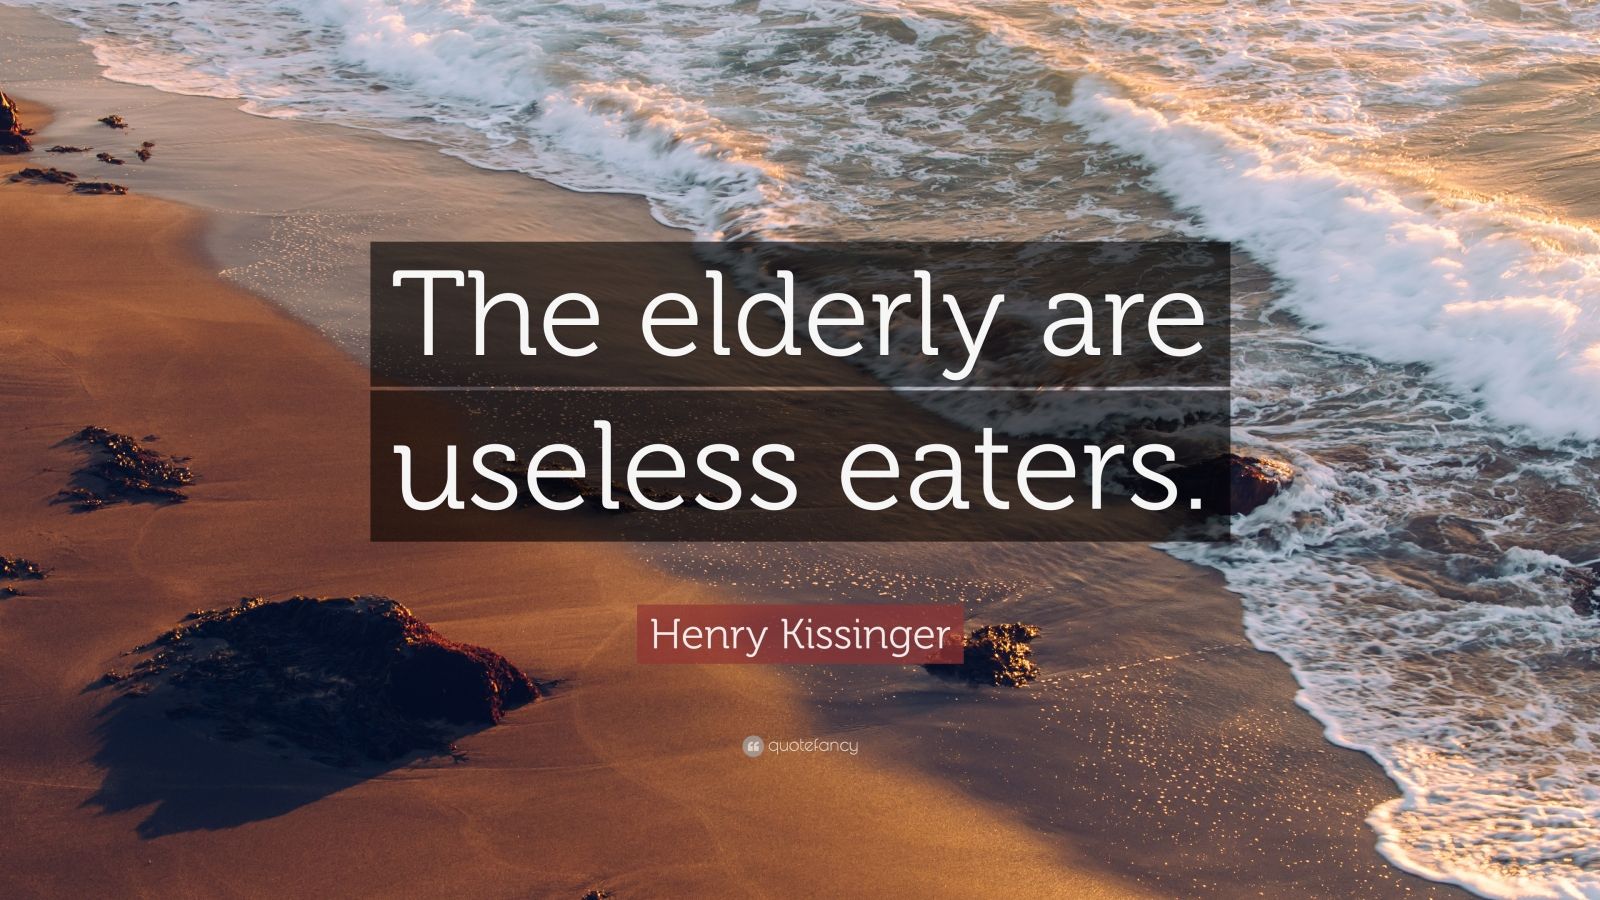 Henry Kissinger Quote: "The elderly are useless eaters."